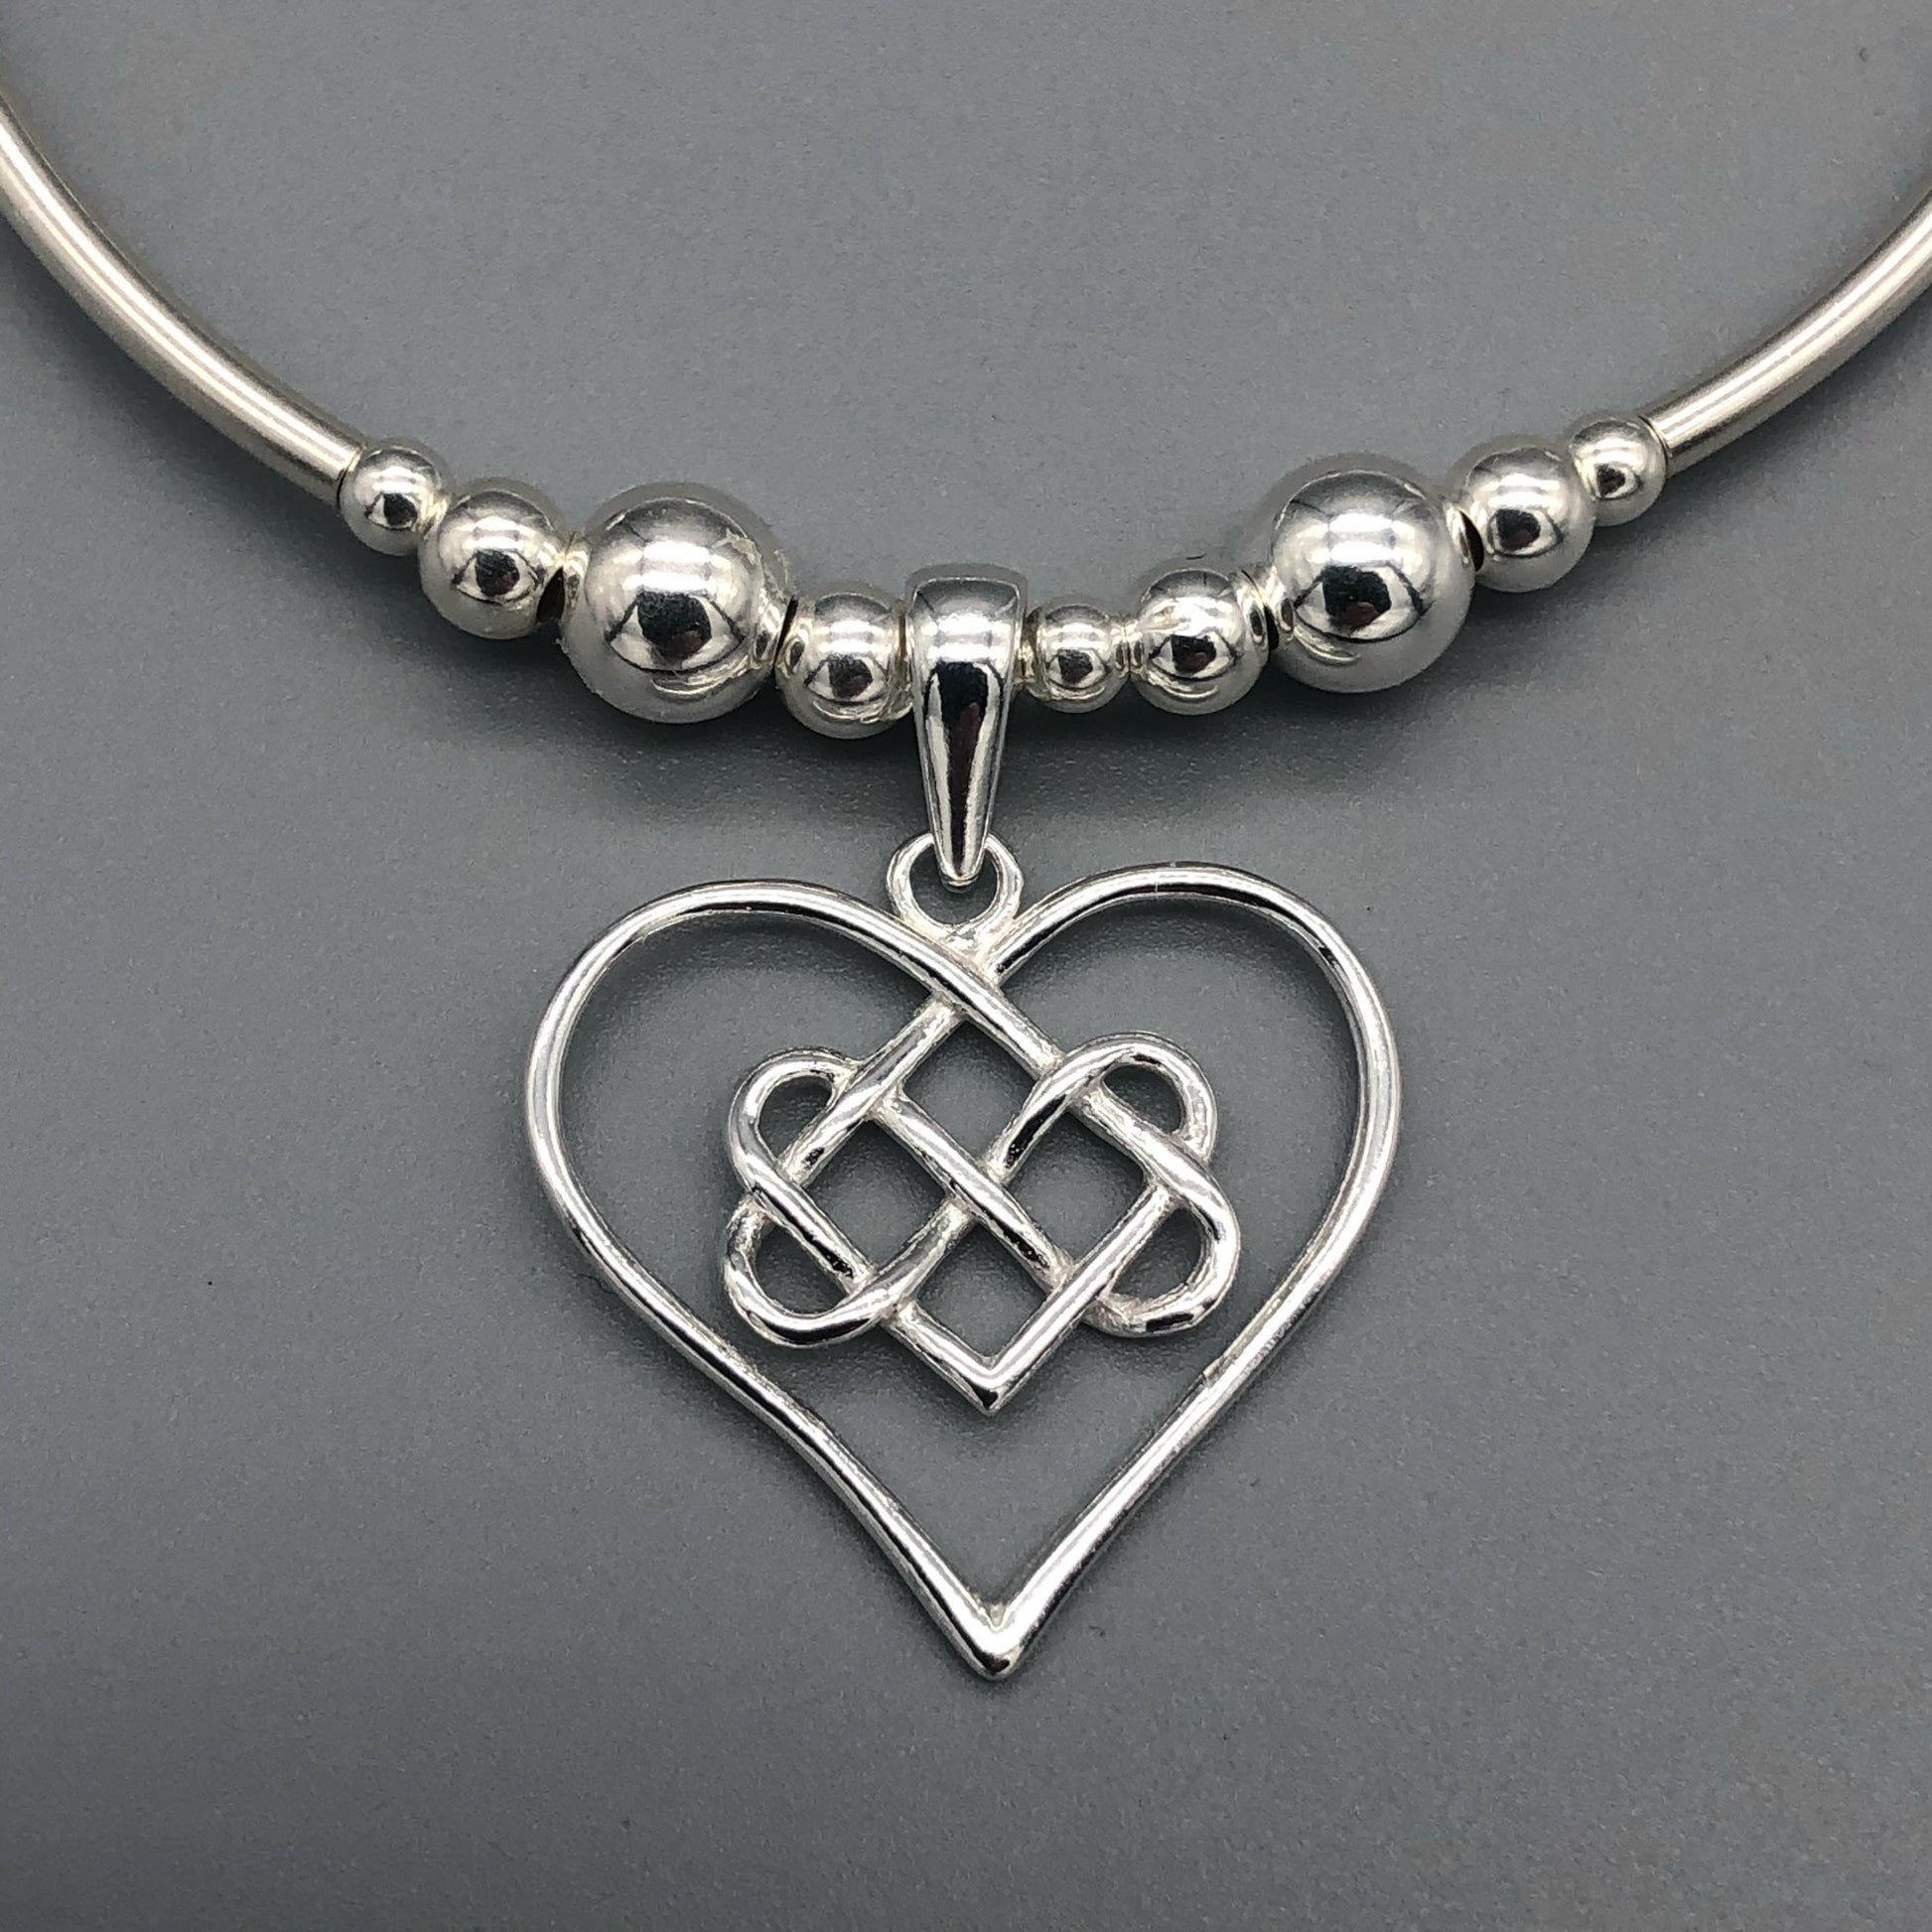 Closeup of Heart & Infinity symbol sterling silver stacking charm bracelet by My Silver Wish